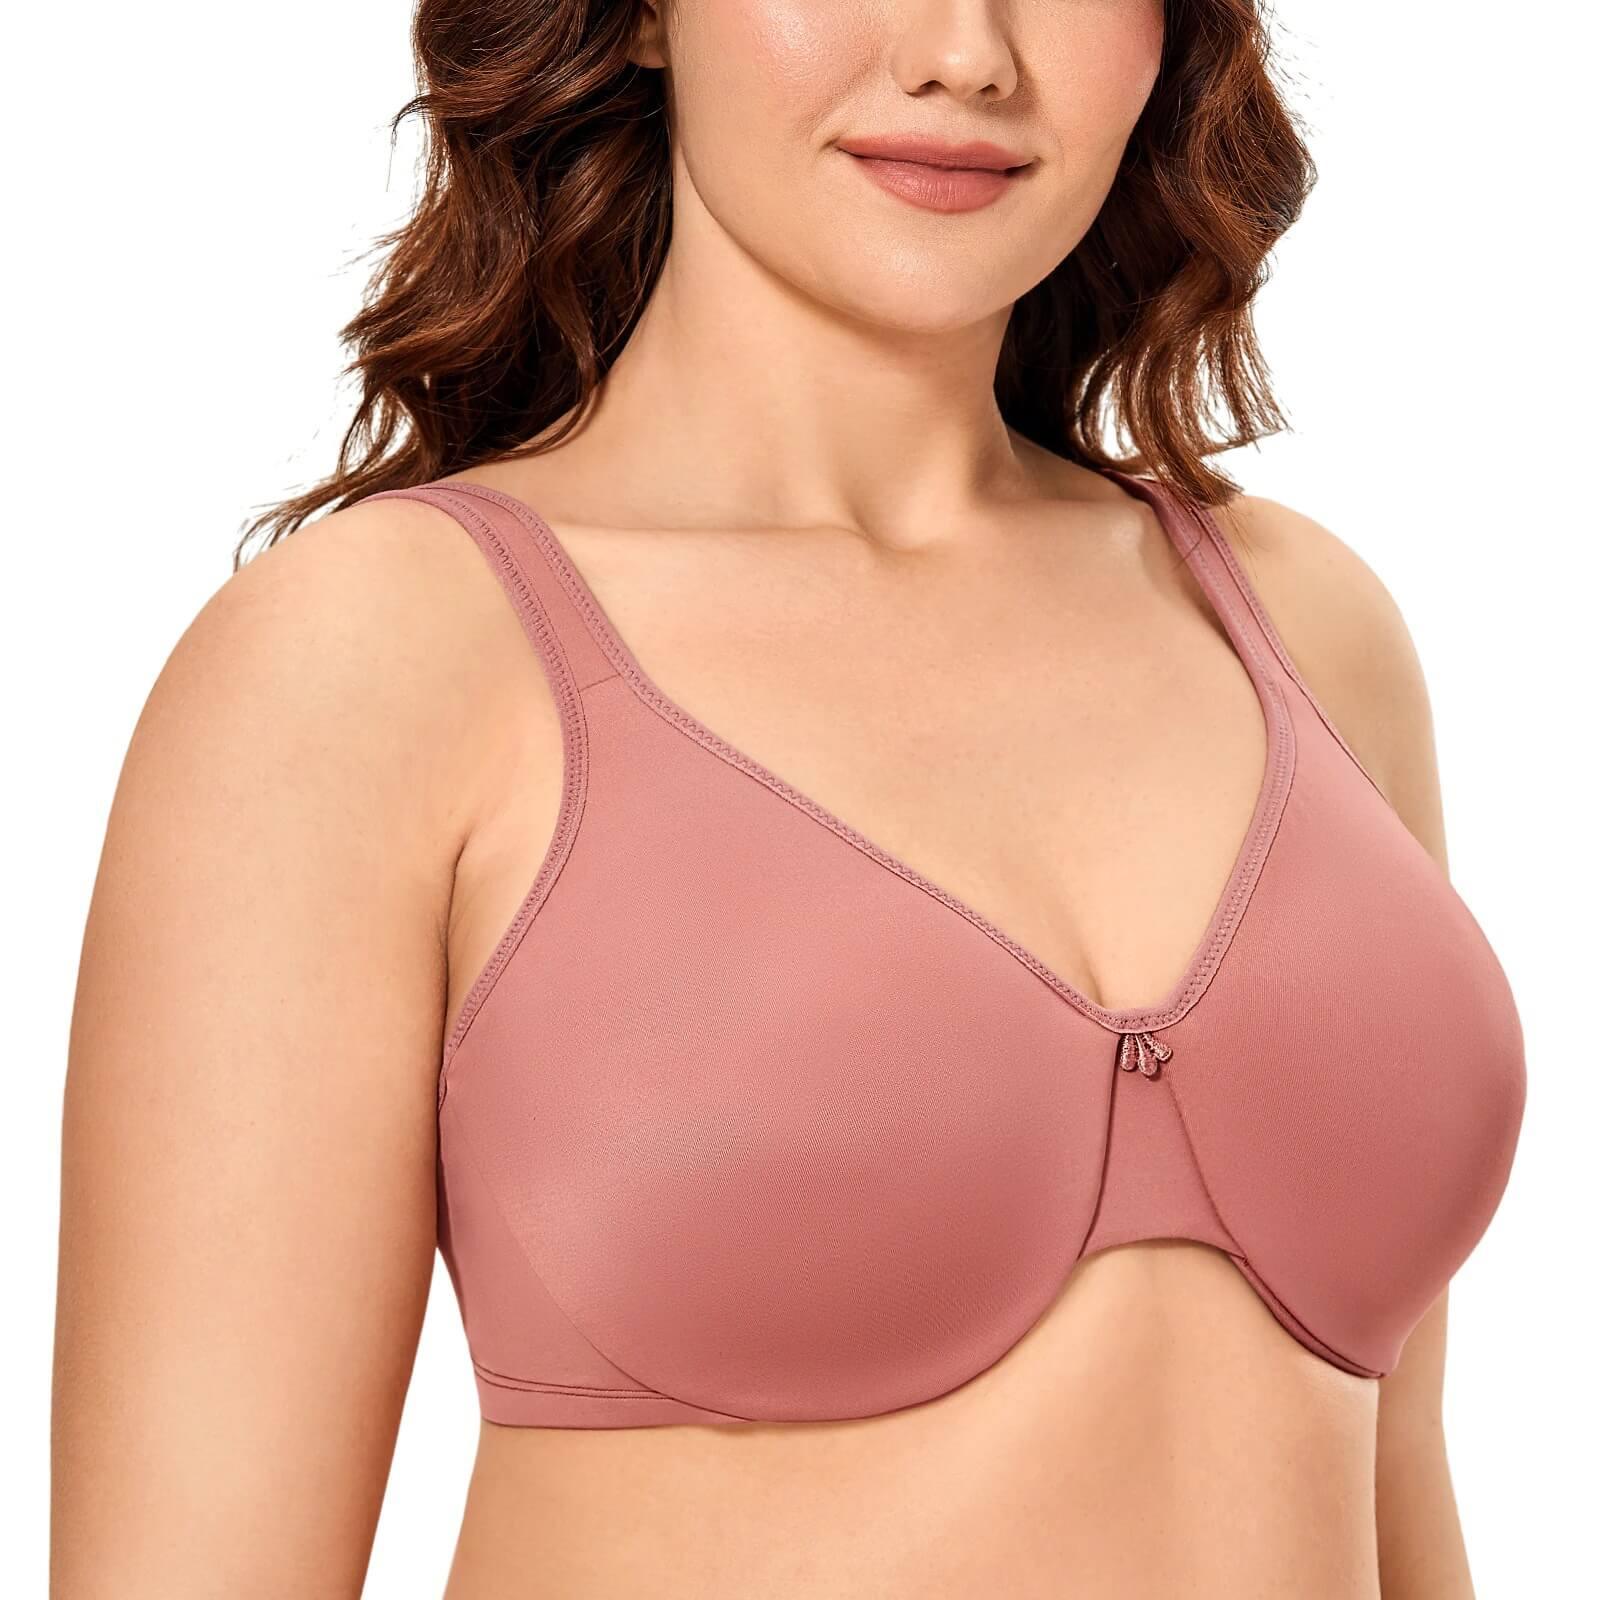  Minimizer Bras For Women Full Coverage Underwire Bras For  Heavy Breast 34G Pastel Blue